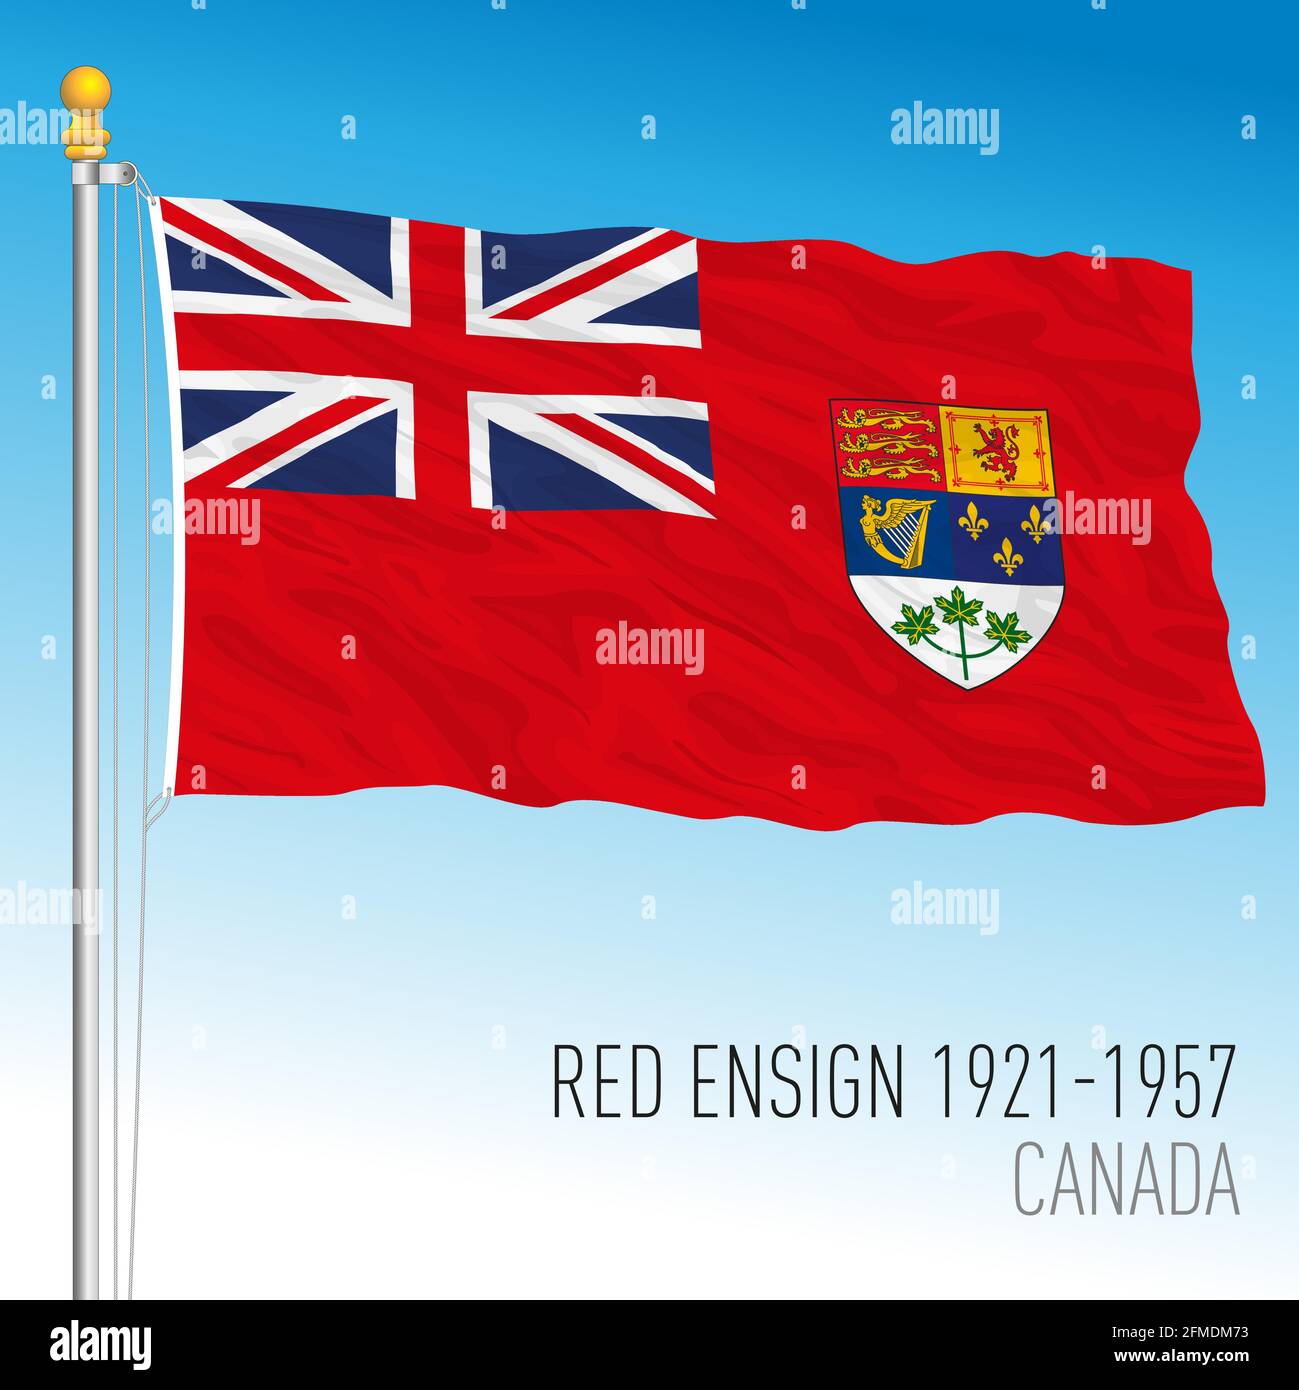 Canadian red ensign historical flag, 1921 - 1957, Canada, vector illustration Stock Vector